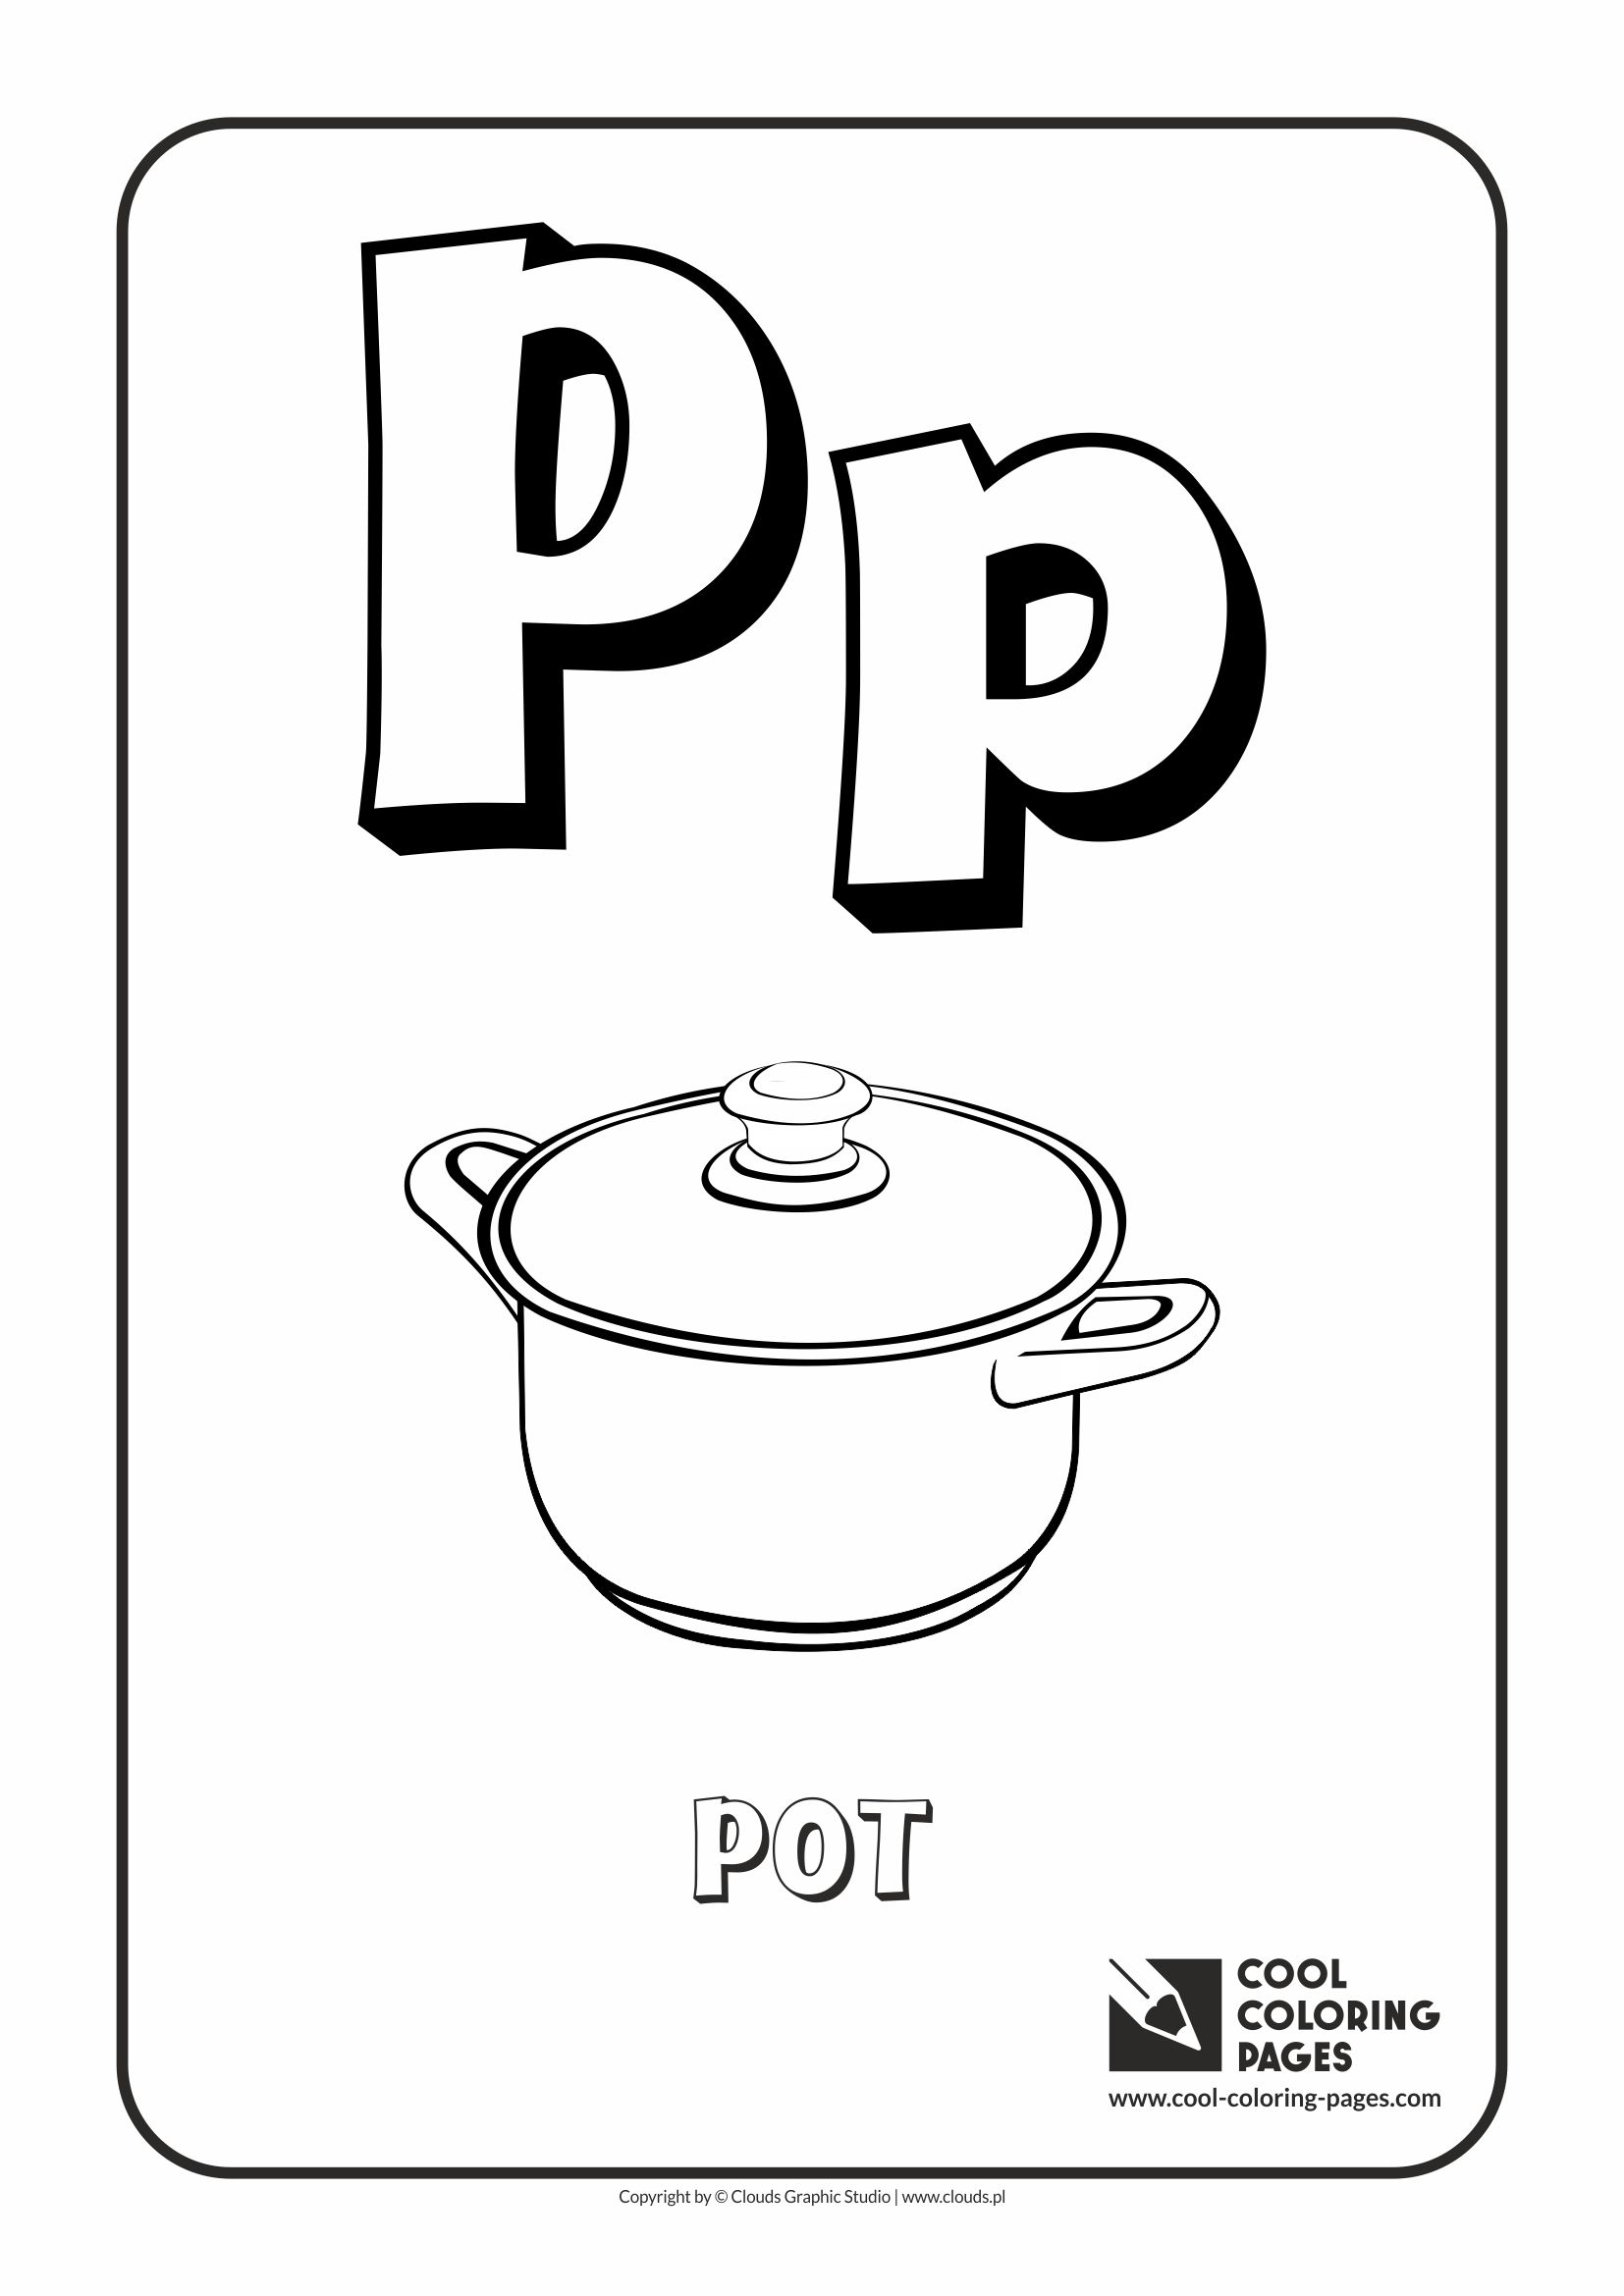 Cool Coloring Pages Letter P   Coloring Alphabet   Cool Coloring Pages ...